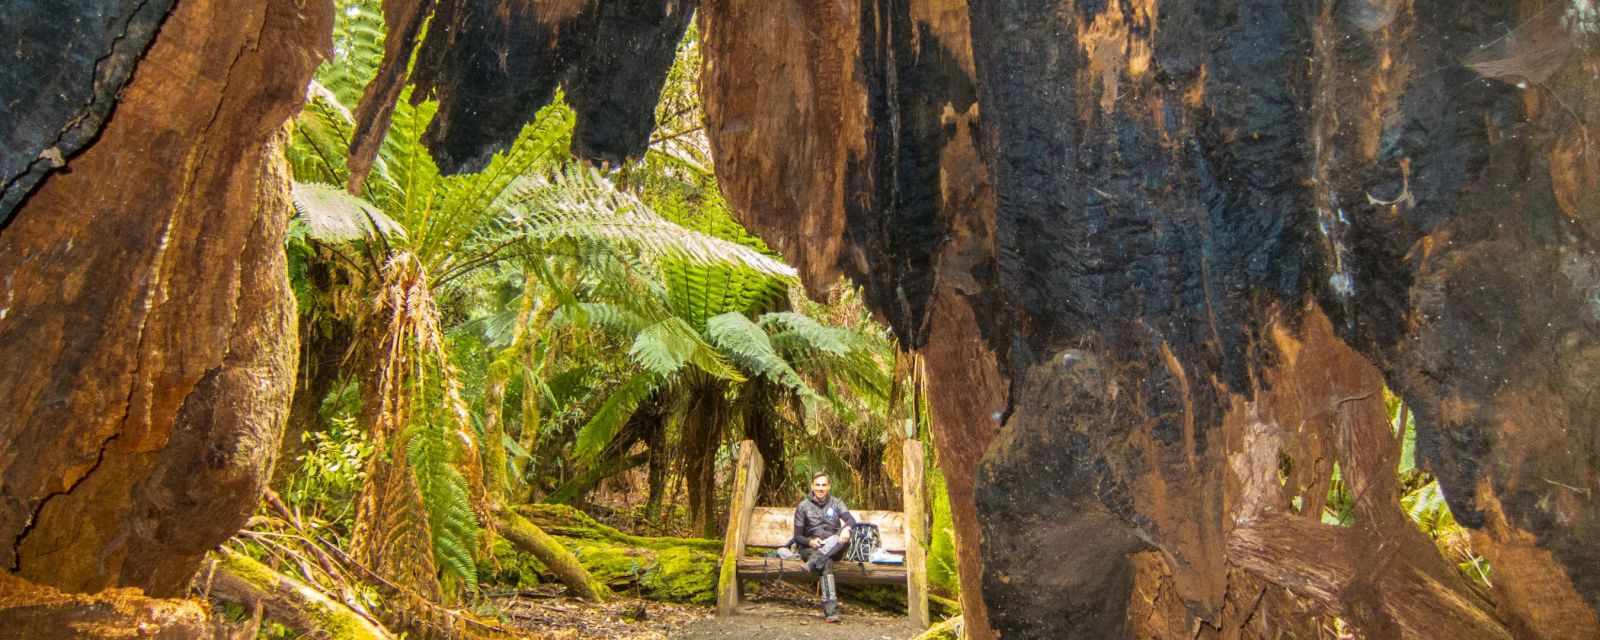 Blue Tier Giant - The Widest Living Tree in Australia